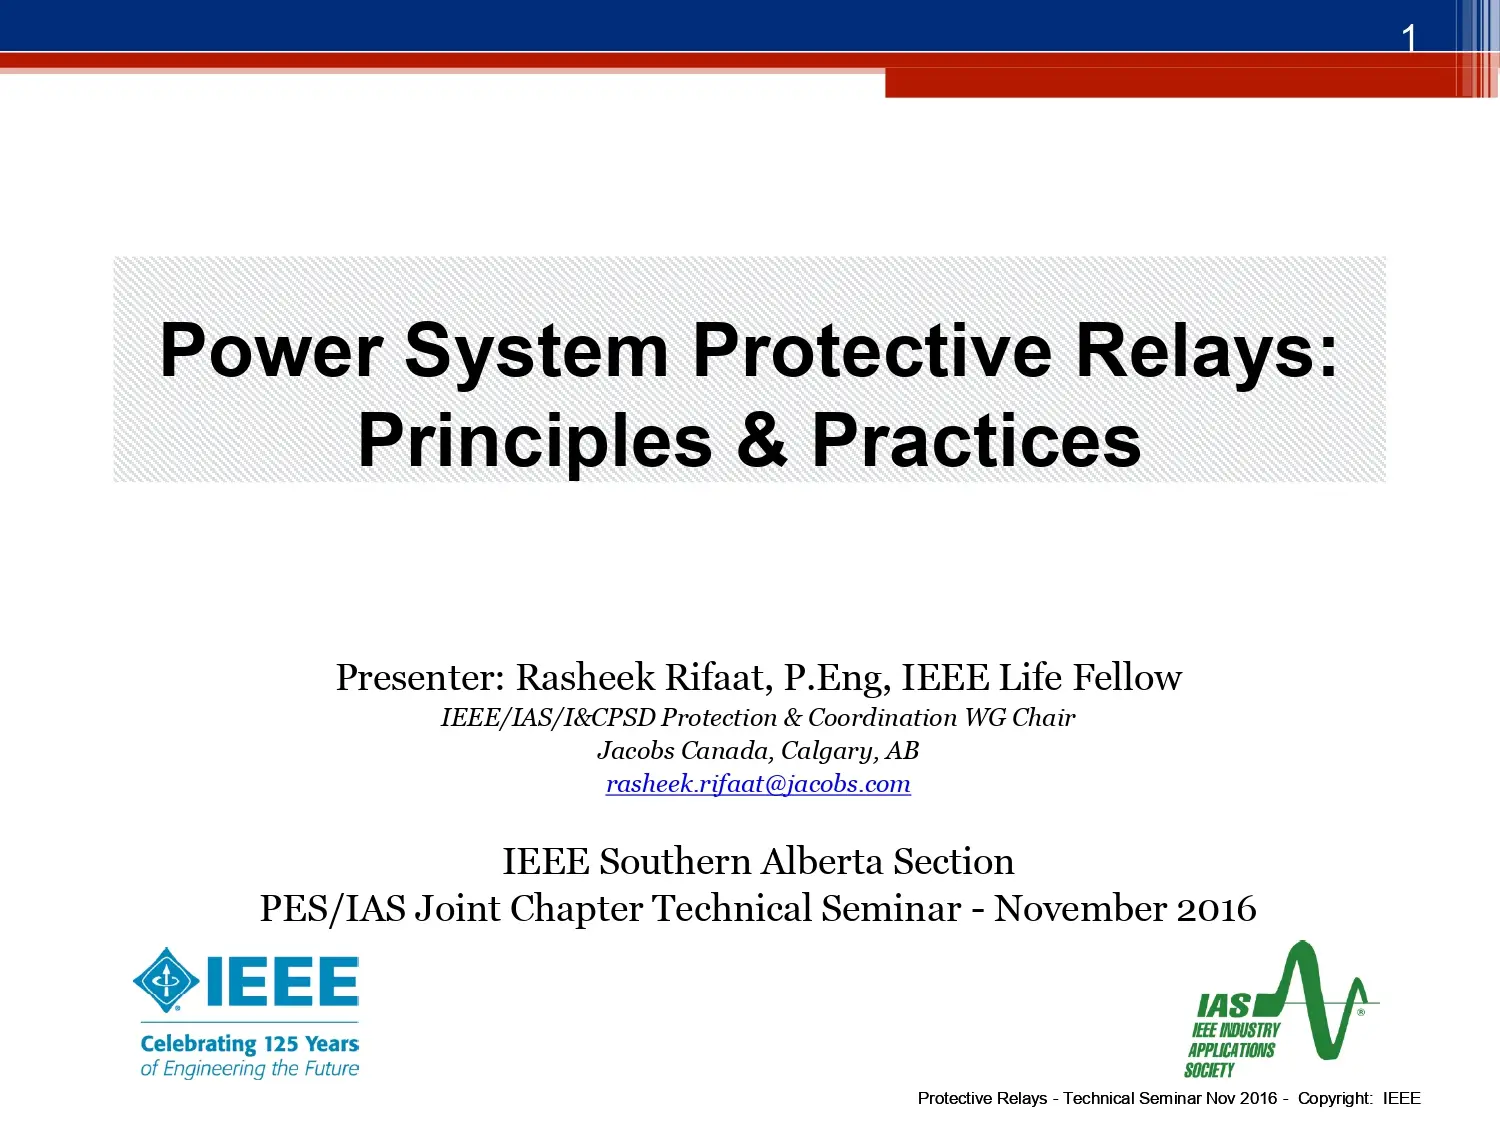 Power System Protective Relays: Principles & Practices